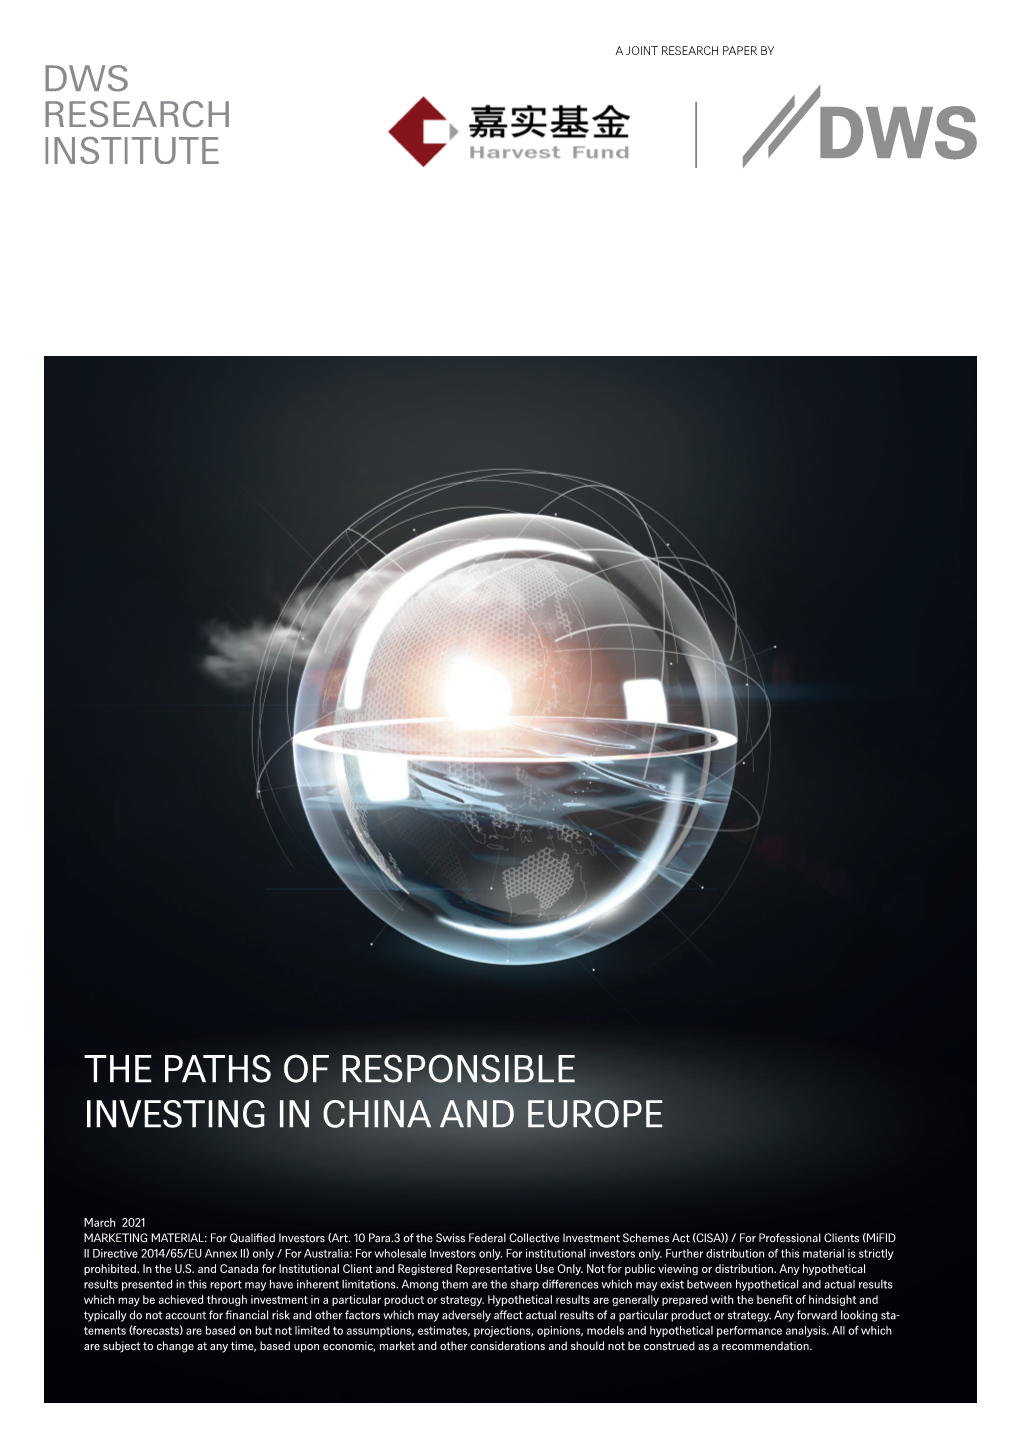 The Paths of Responsible Investing in China and Europe